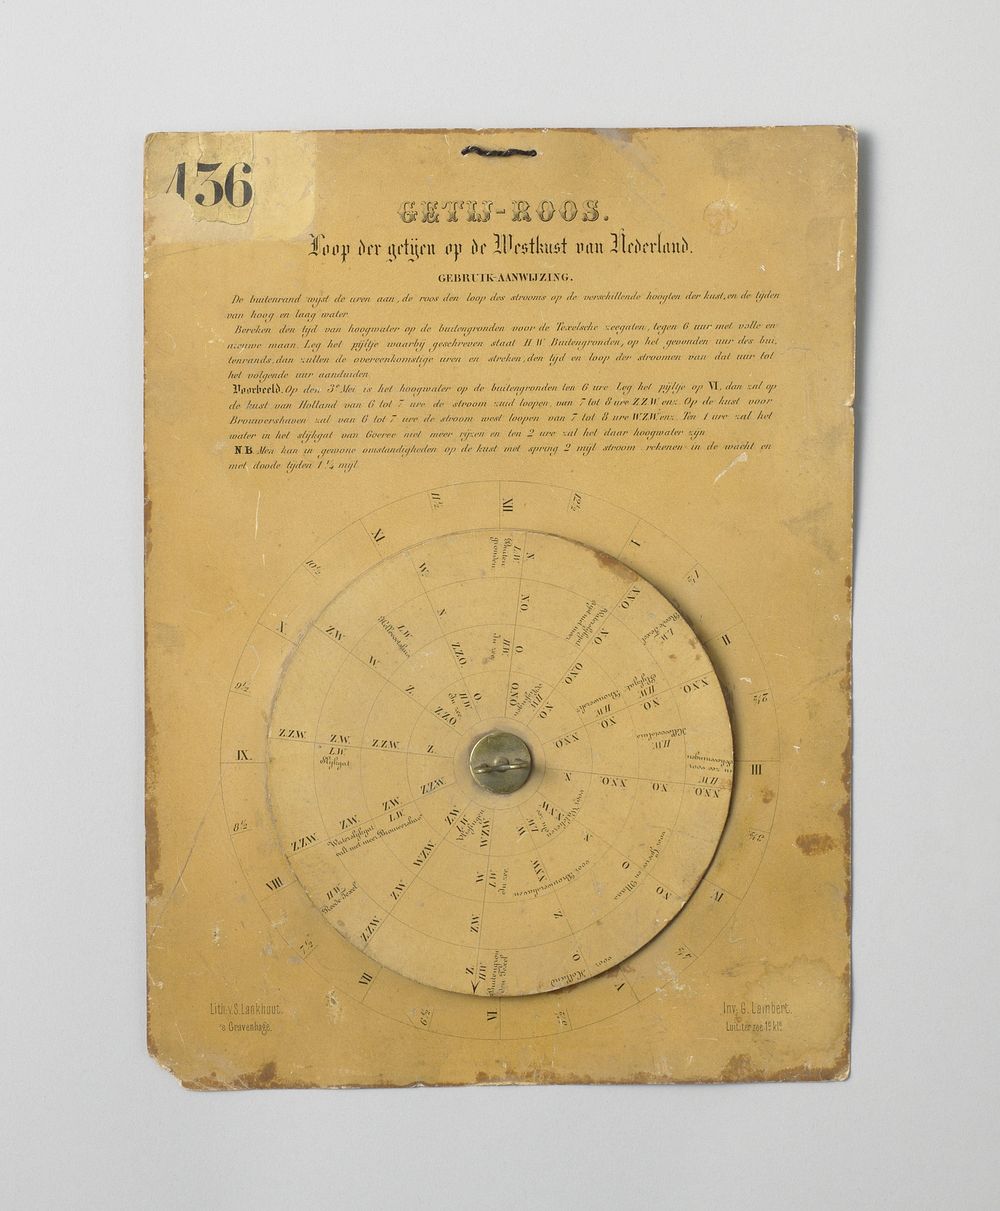 Tide Table for the Dutch West Coast (1870) by Samuel Lankhout and G Lambert